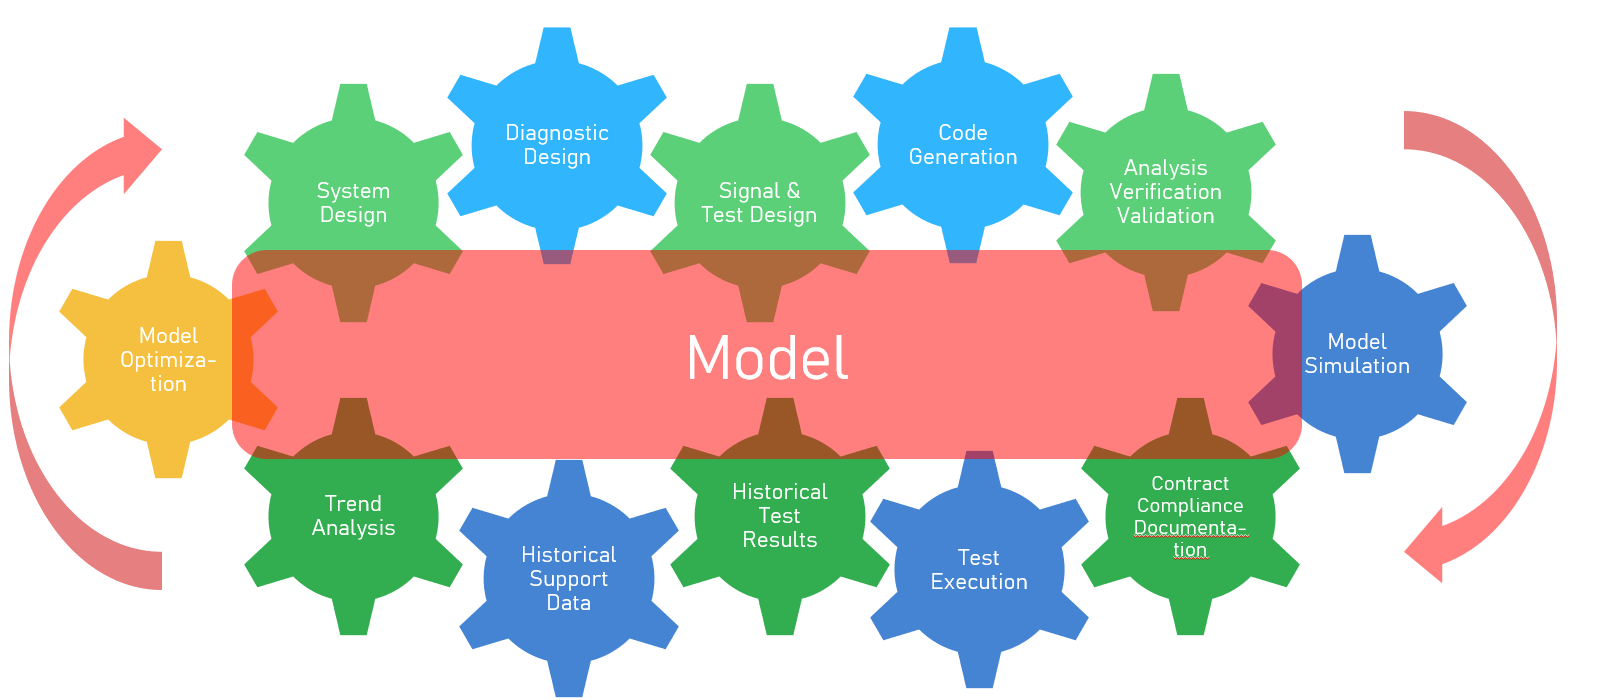 Integrated Model-Based Diagnostic, Test, Maintenance and Sustainment